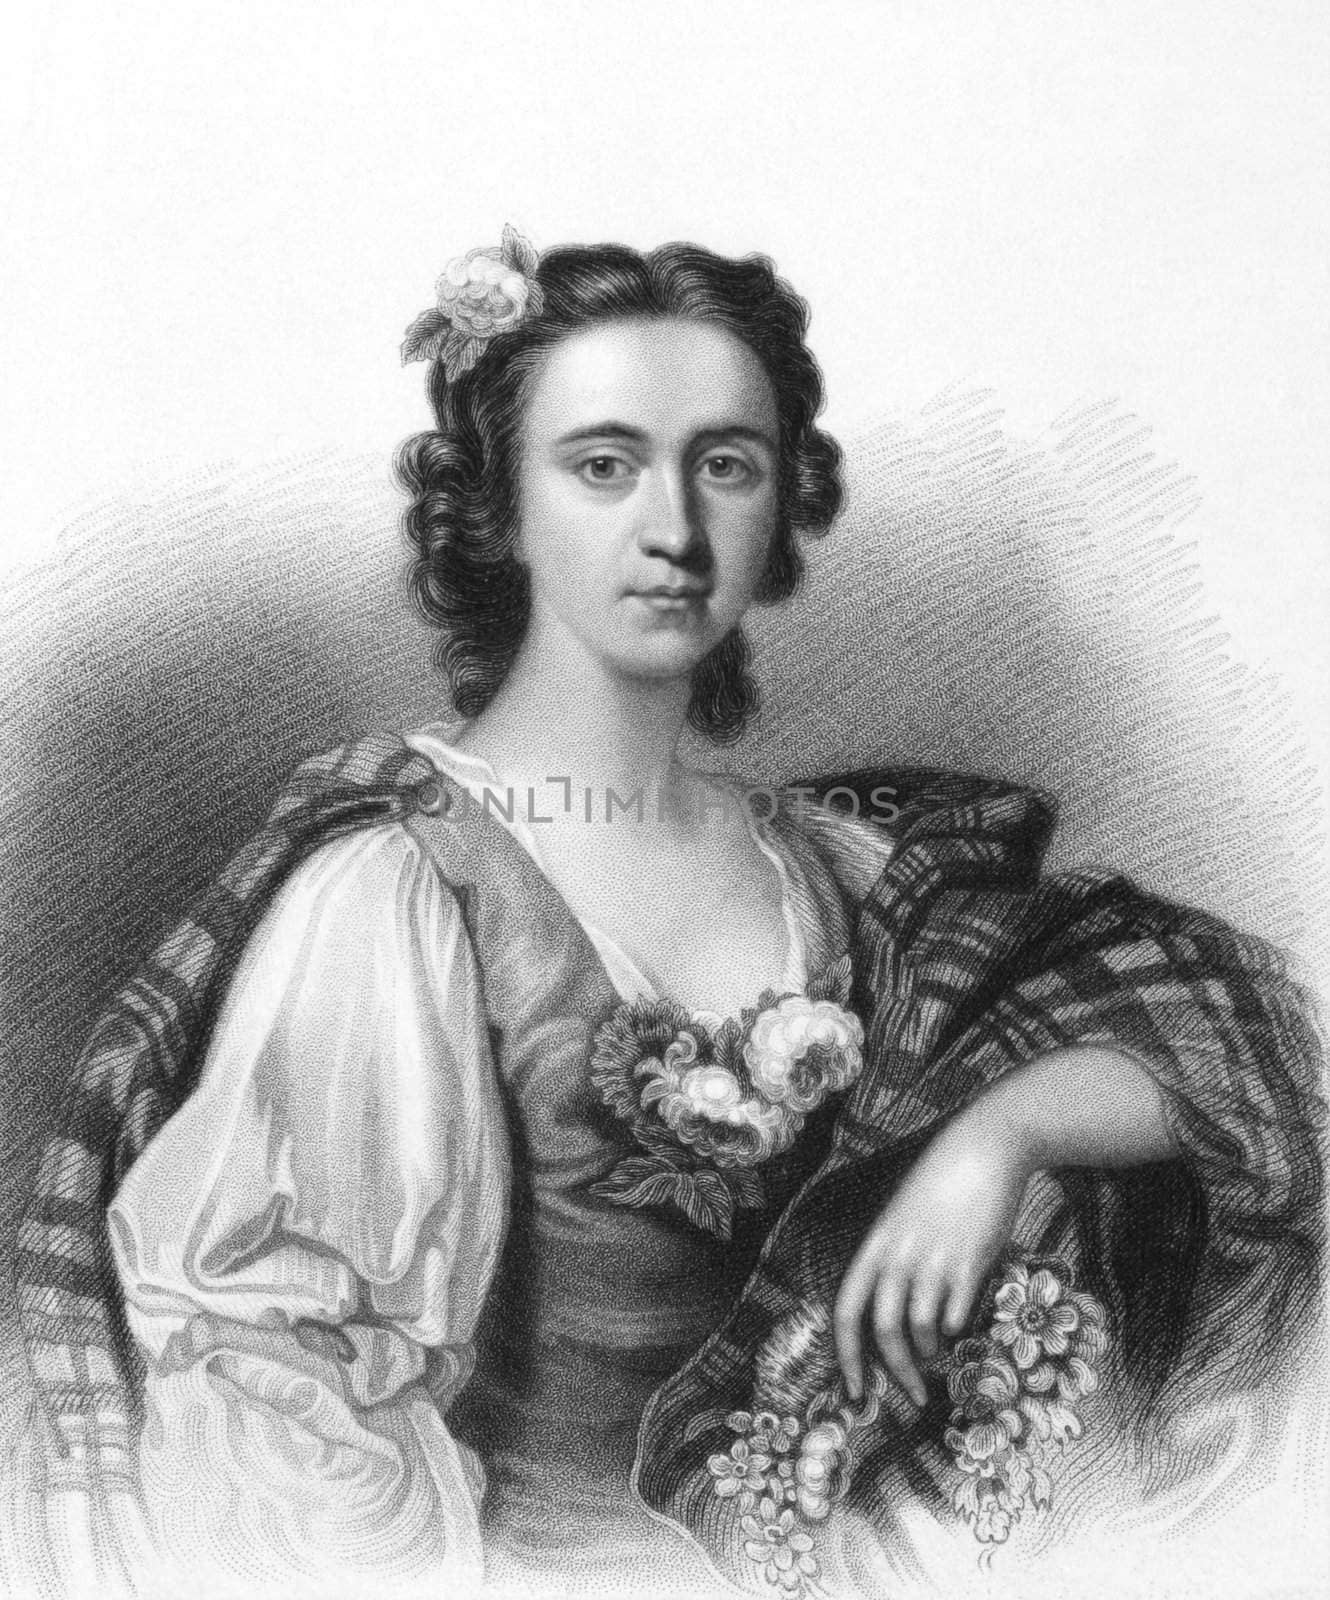 Flora MacDonald (1722-1790) on engraving from the 1800s. Jacobite heroine. Engraved by E.Finden and published in London by J.Murray in 1836.